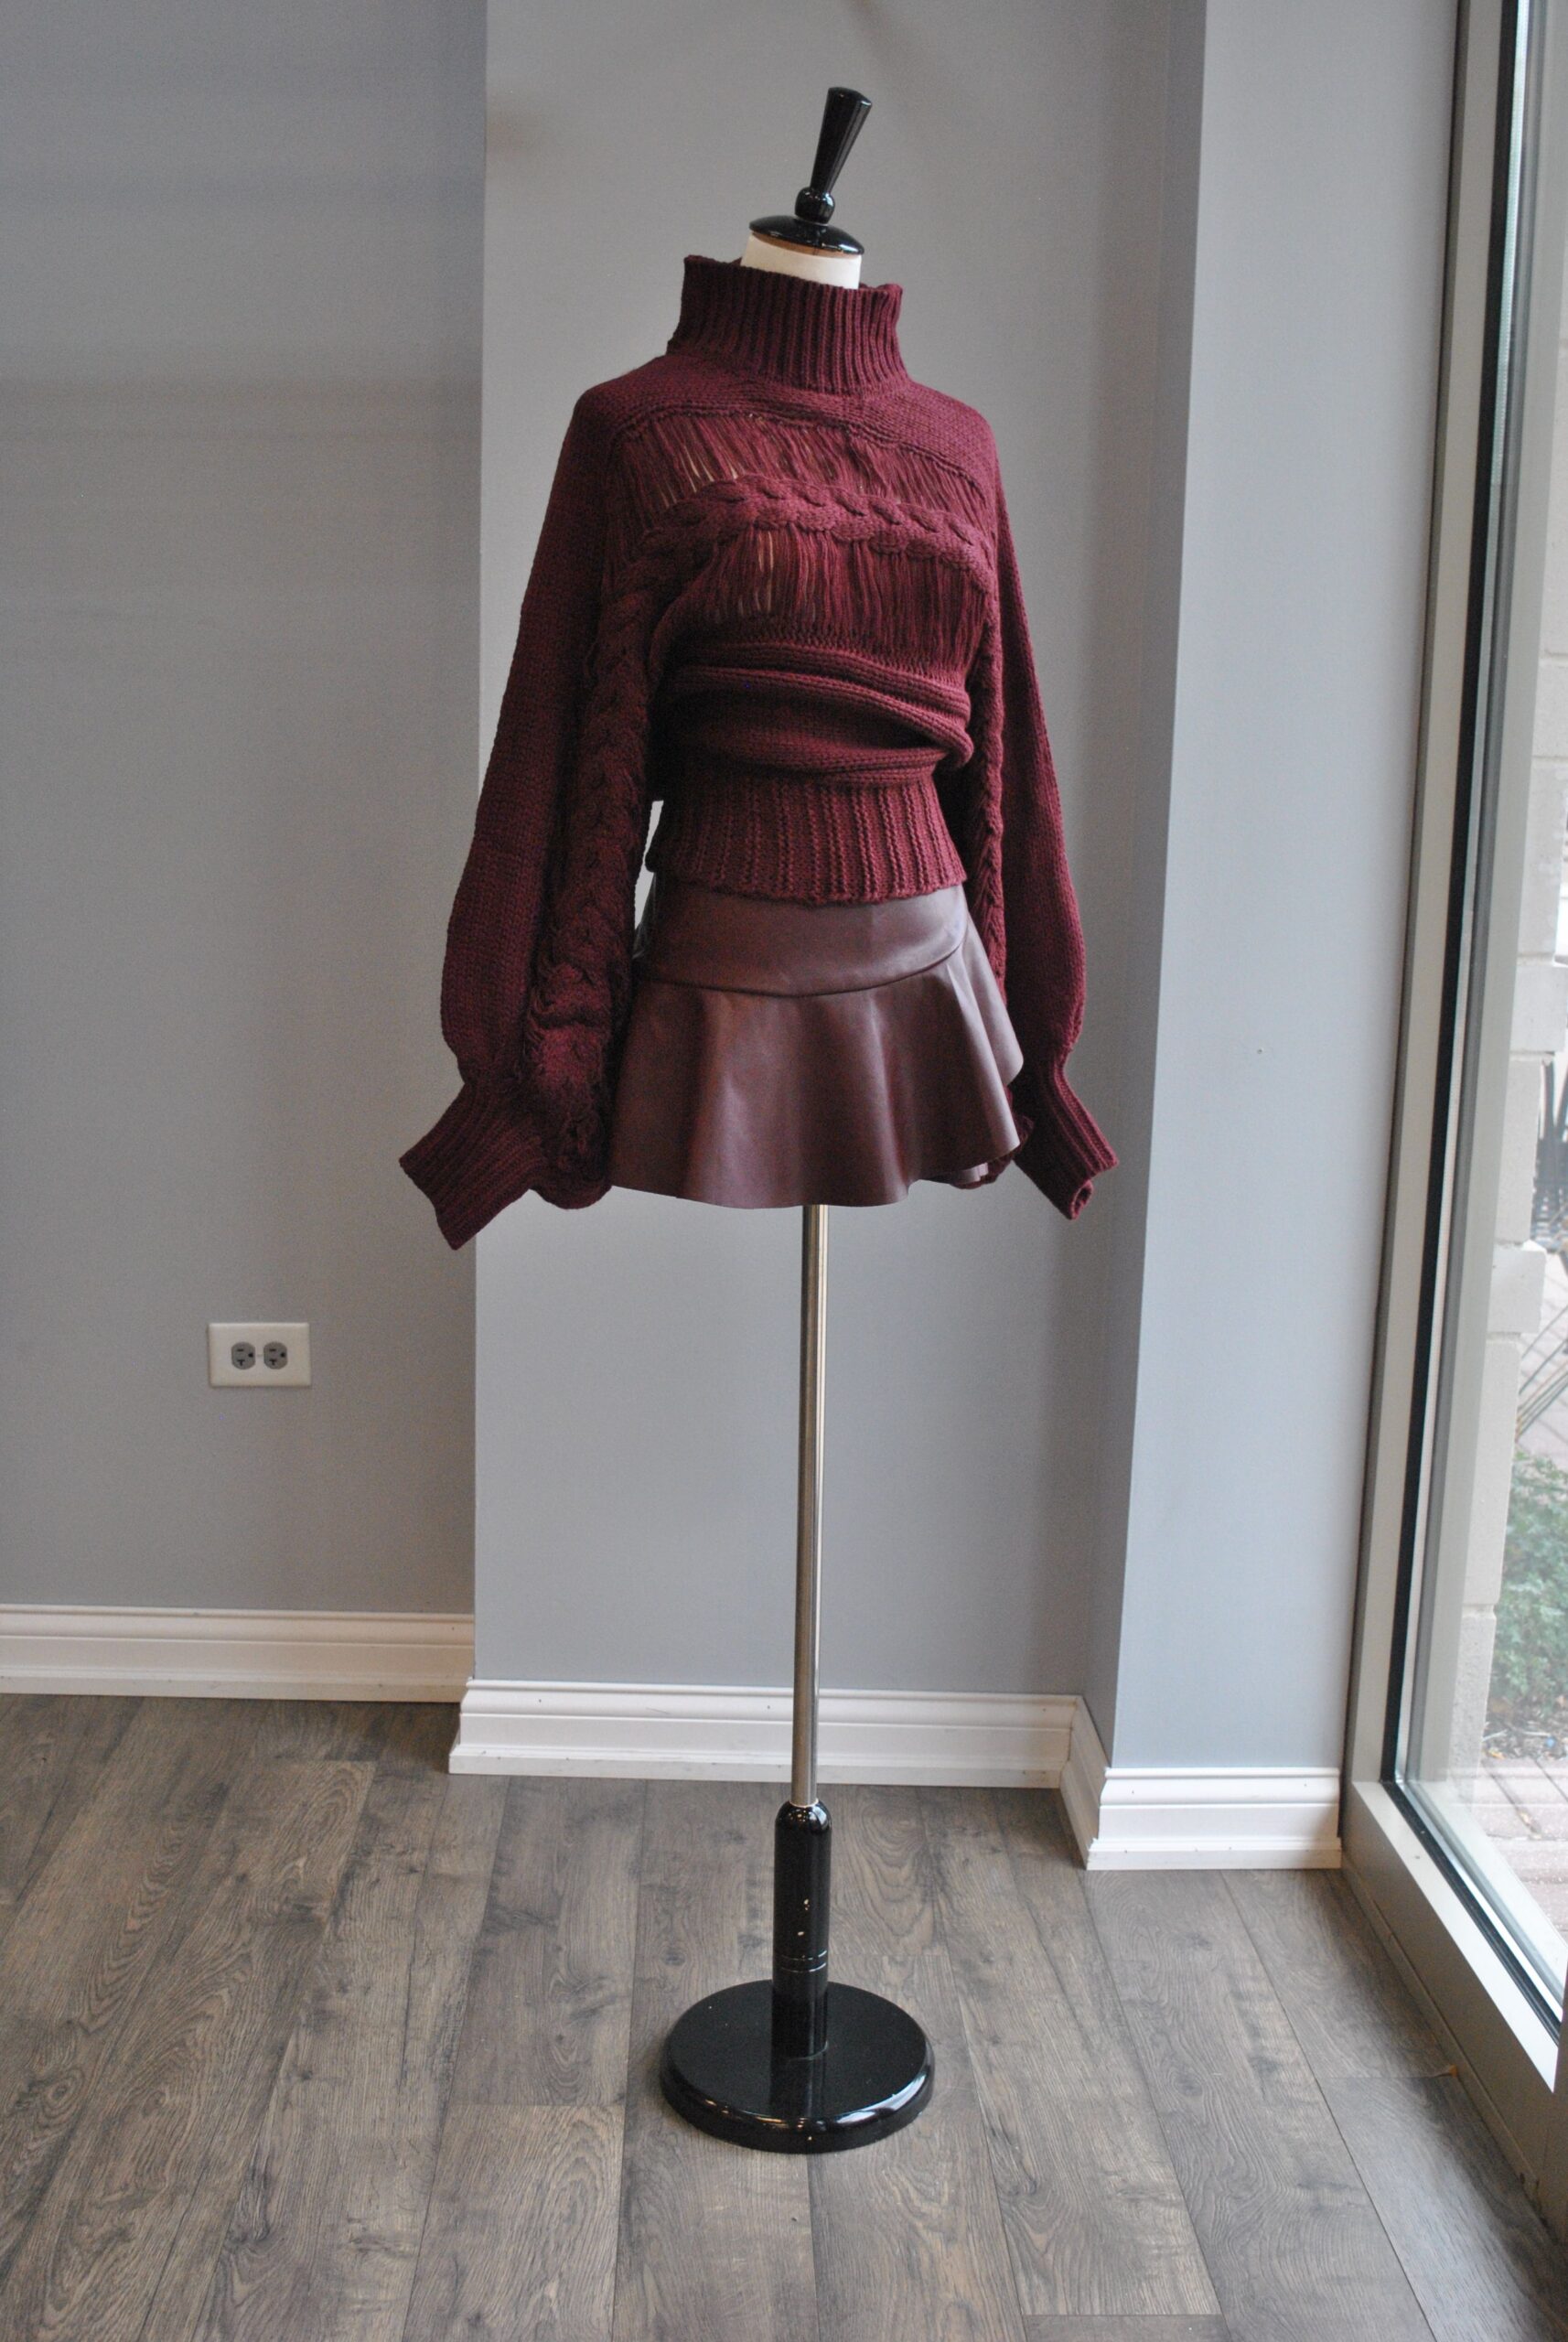 How to Wear Maroon Sweater: Best 15 Cozy & Deep Outfits for Ladies